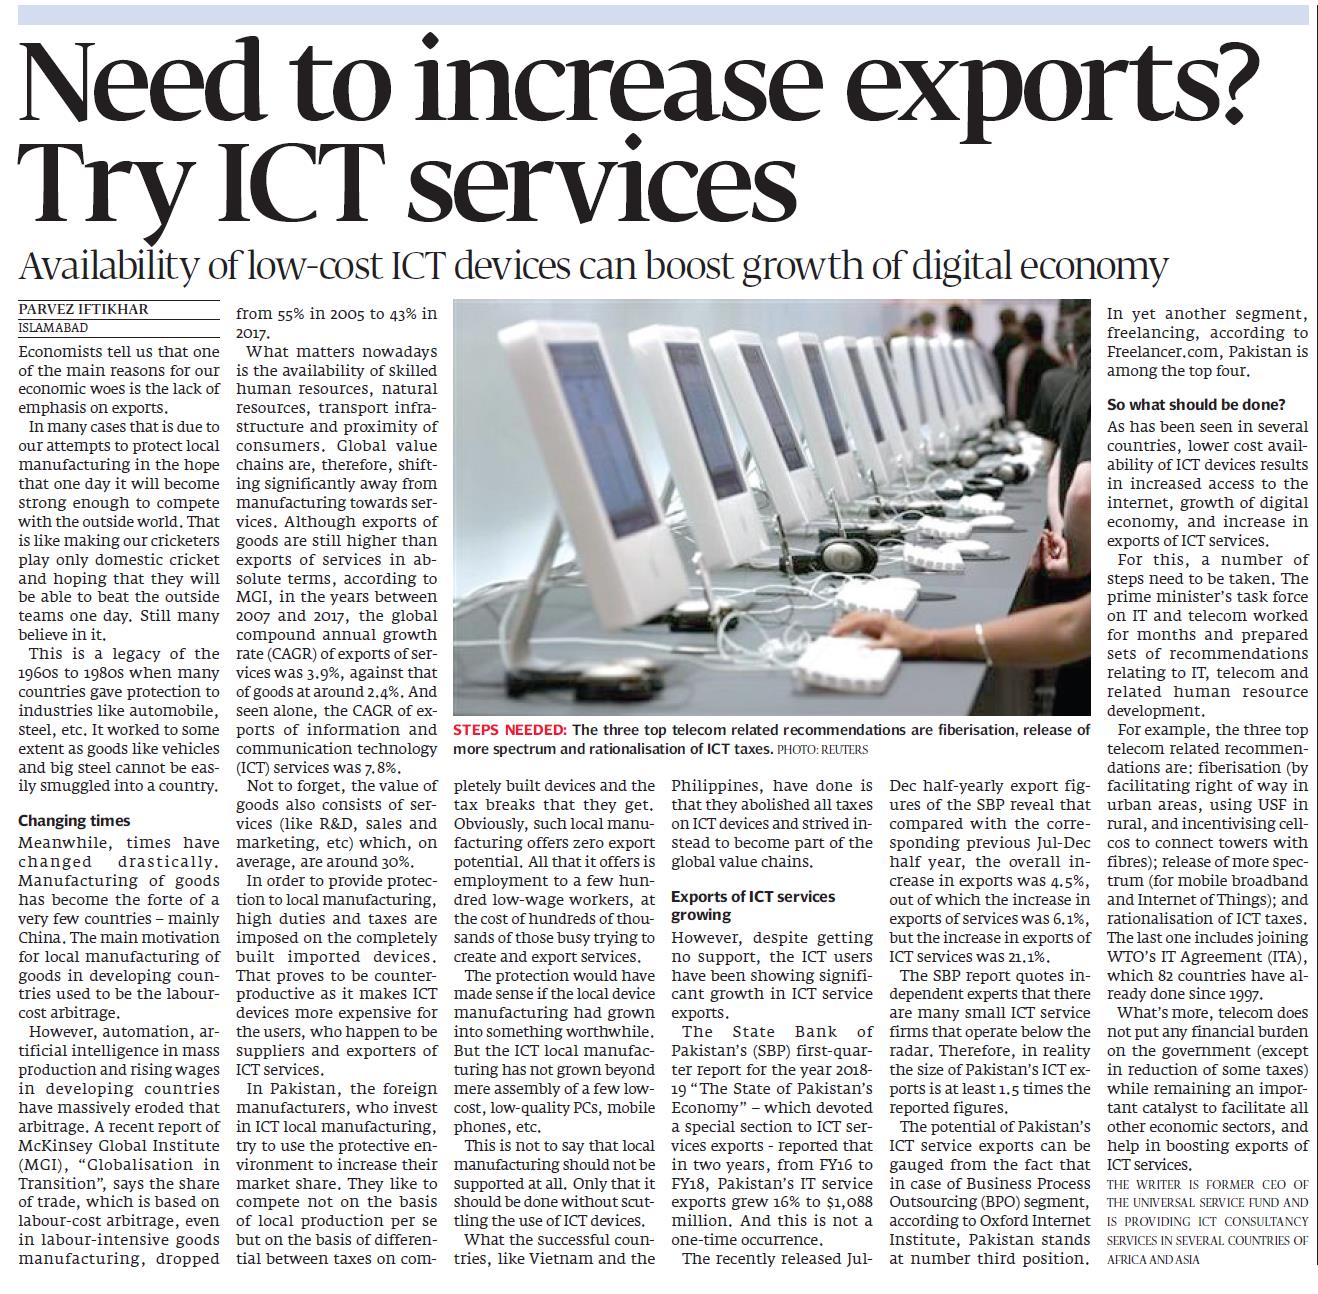 Need to increase exports -Try ICT services, 27Jan2020